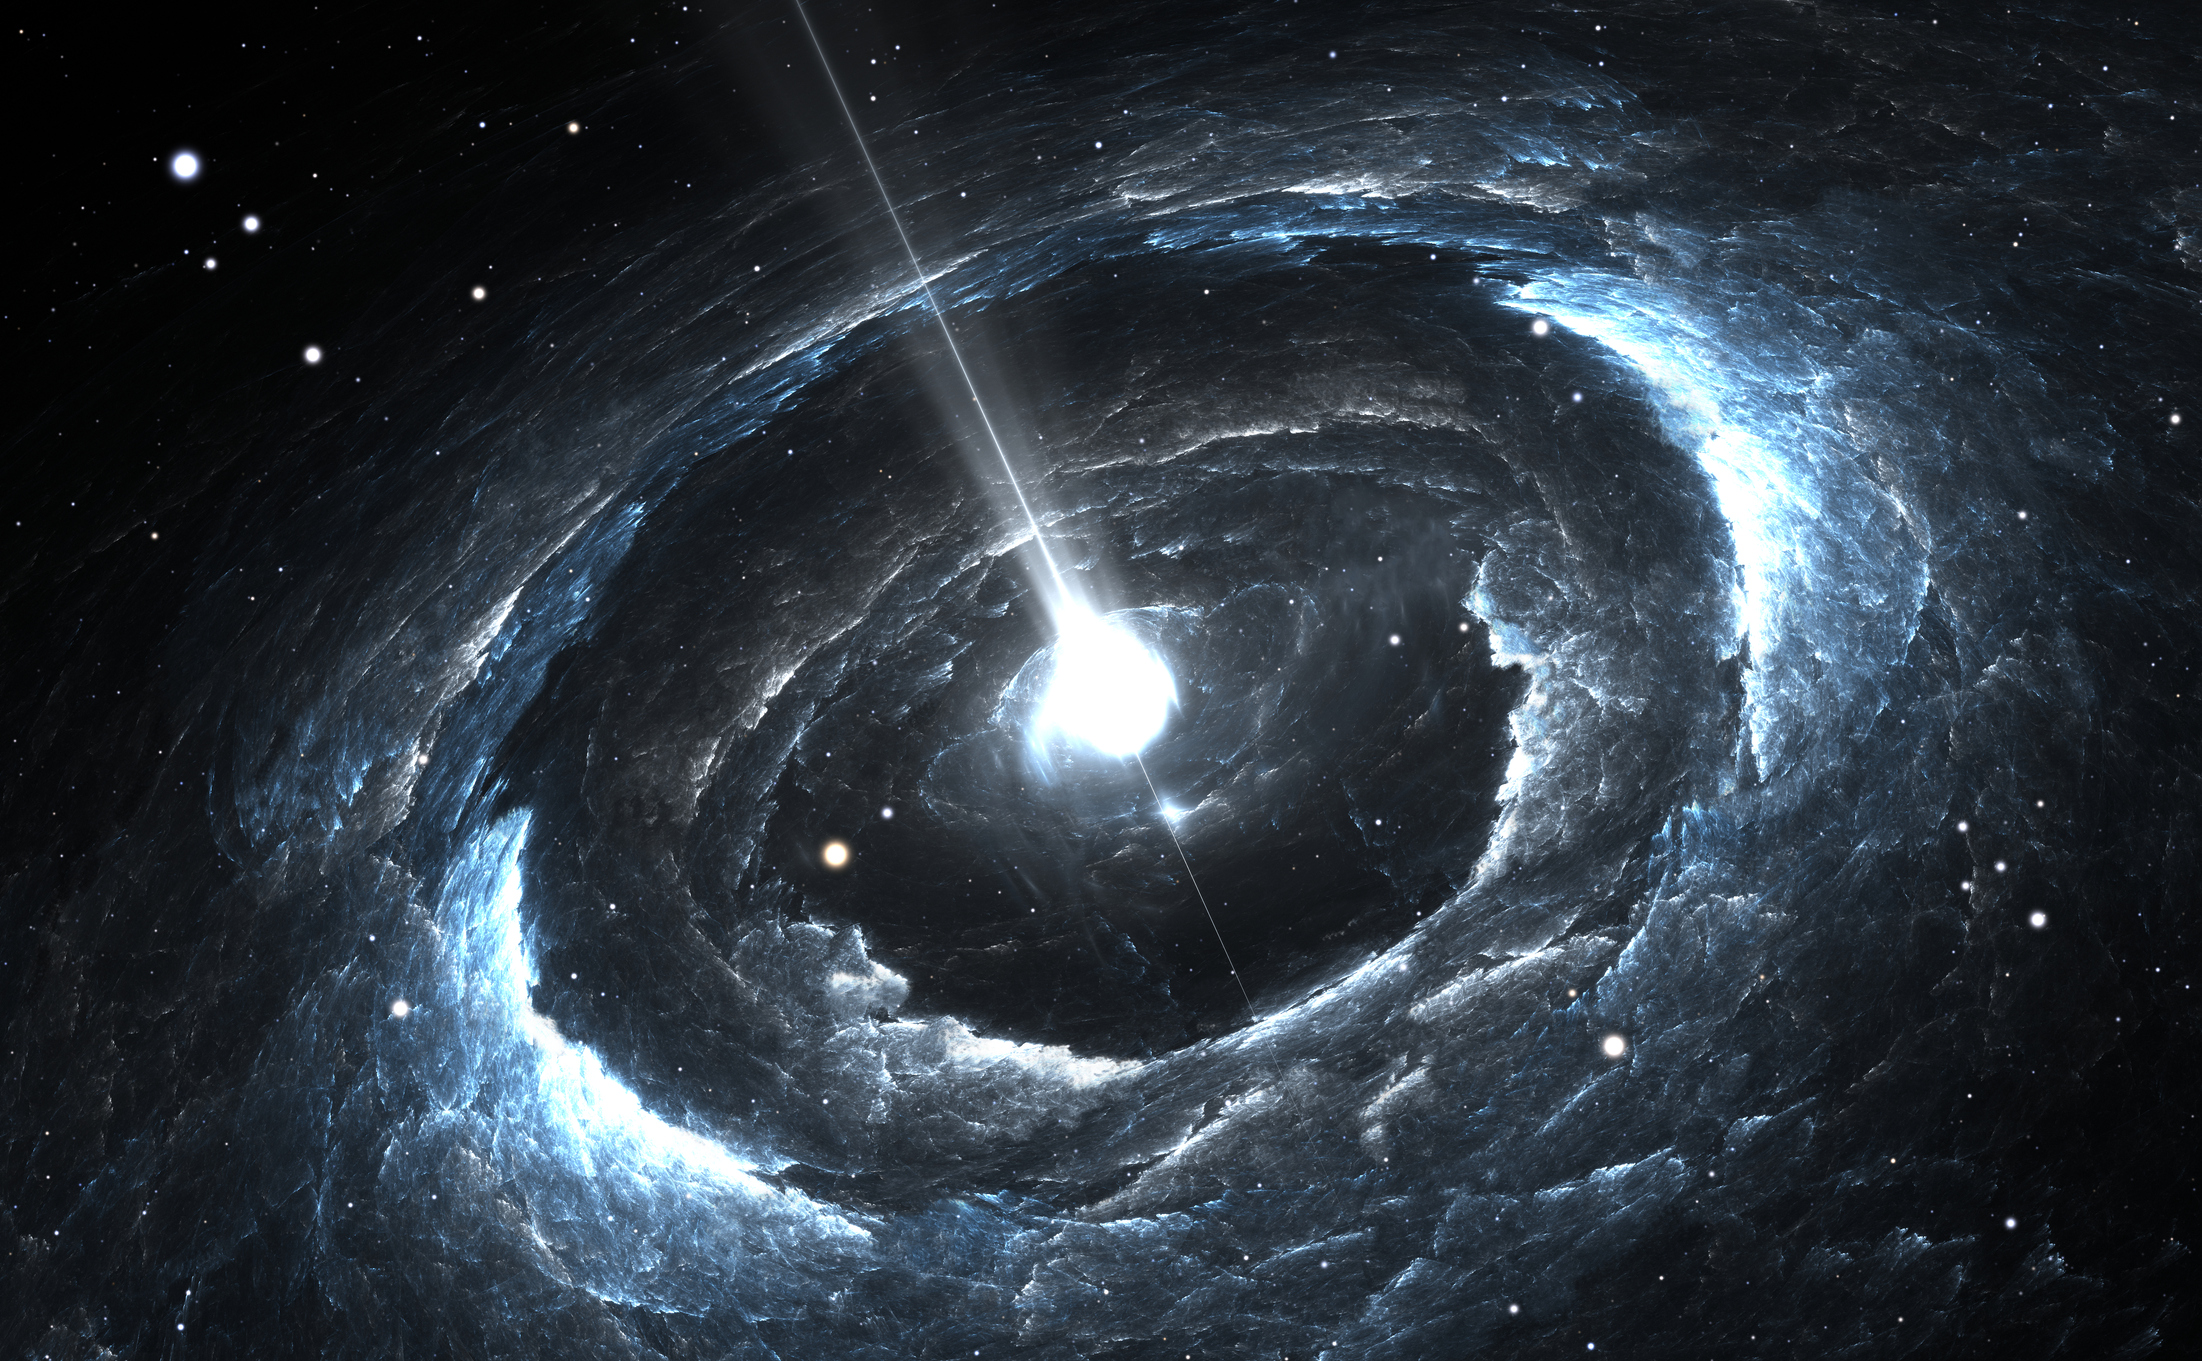 A neutron star with the slowest rotation is discovered